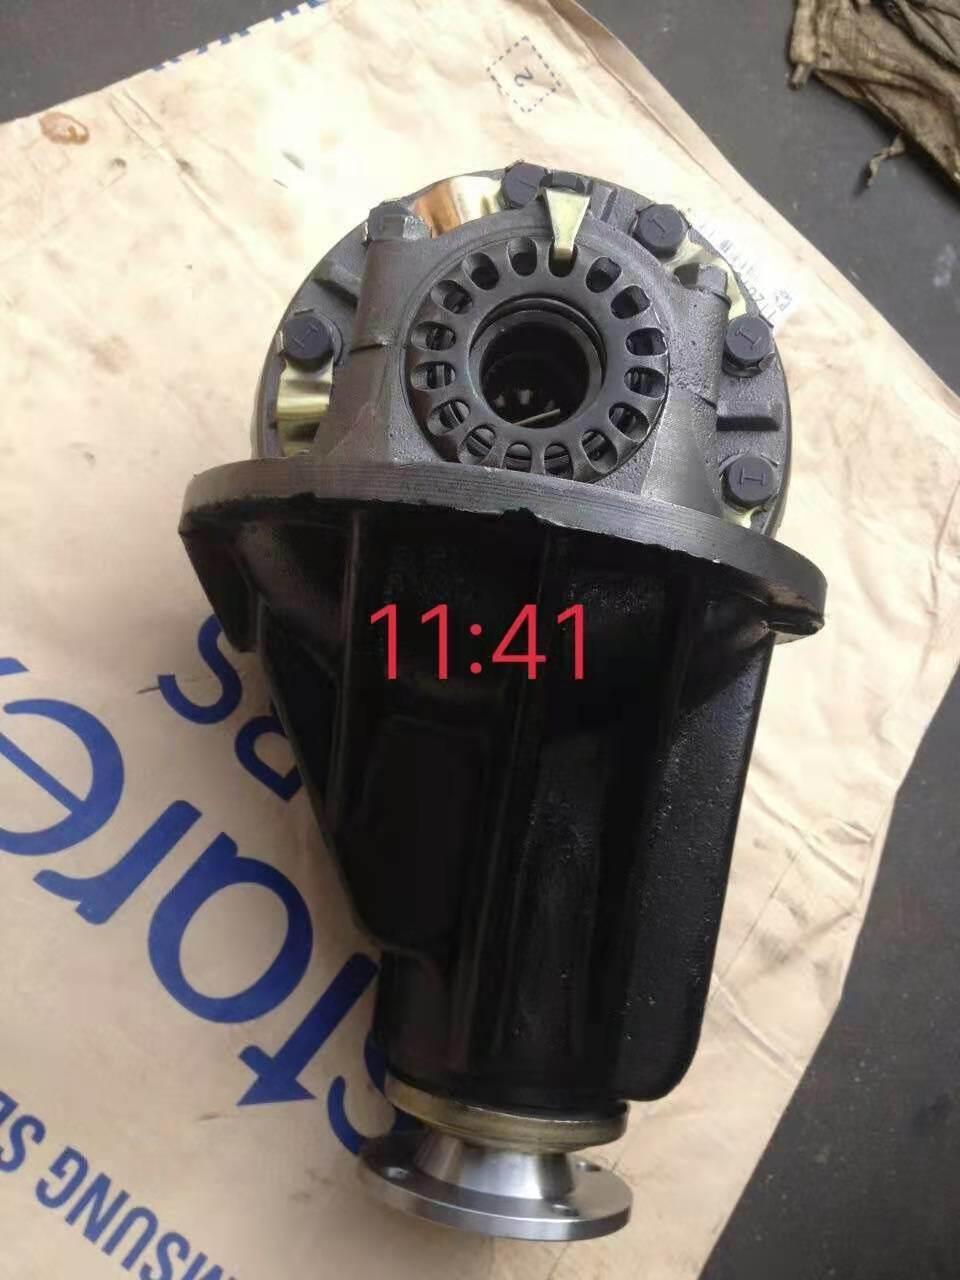 Differential for Toyota Pickup & Hiace Ratio 4.1 (10: 41)